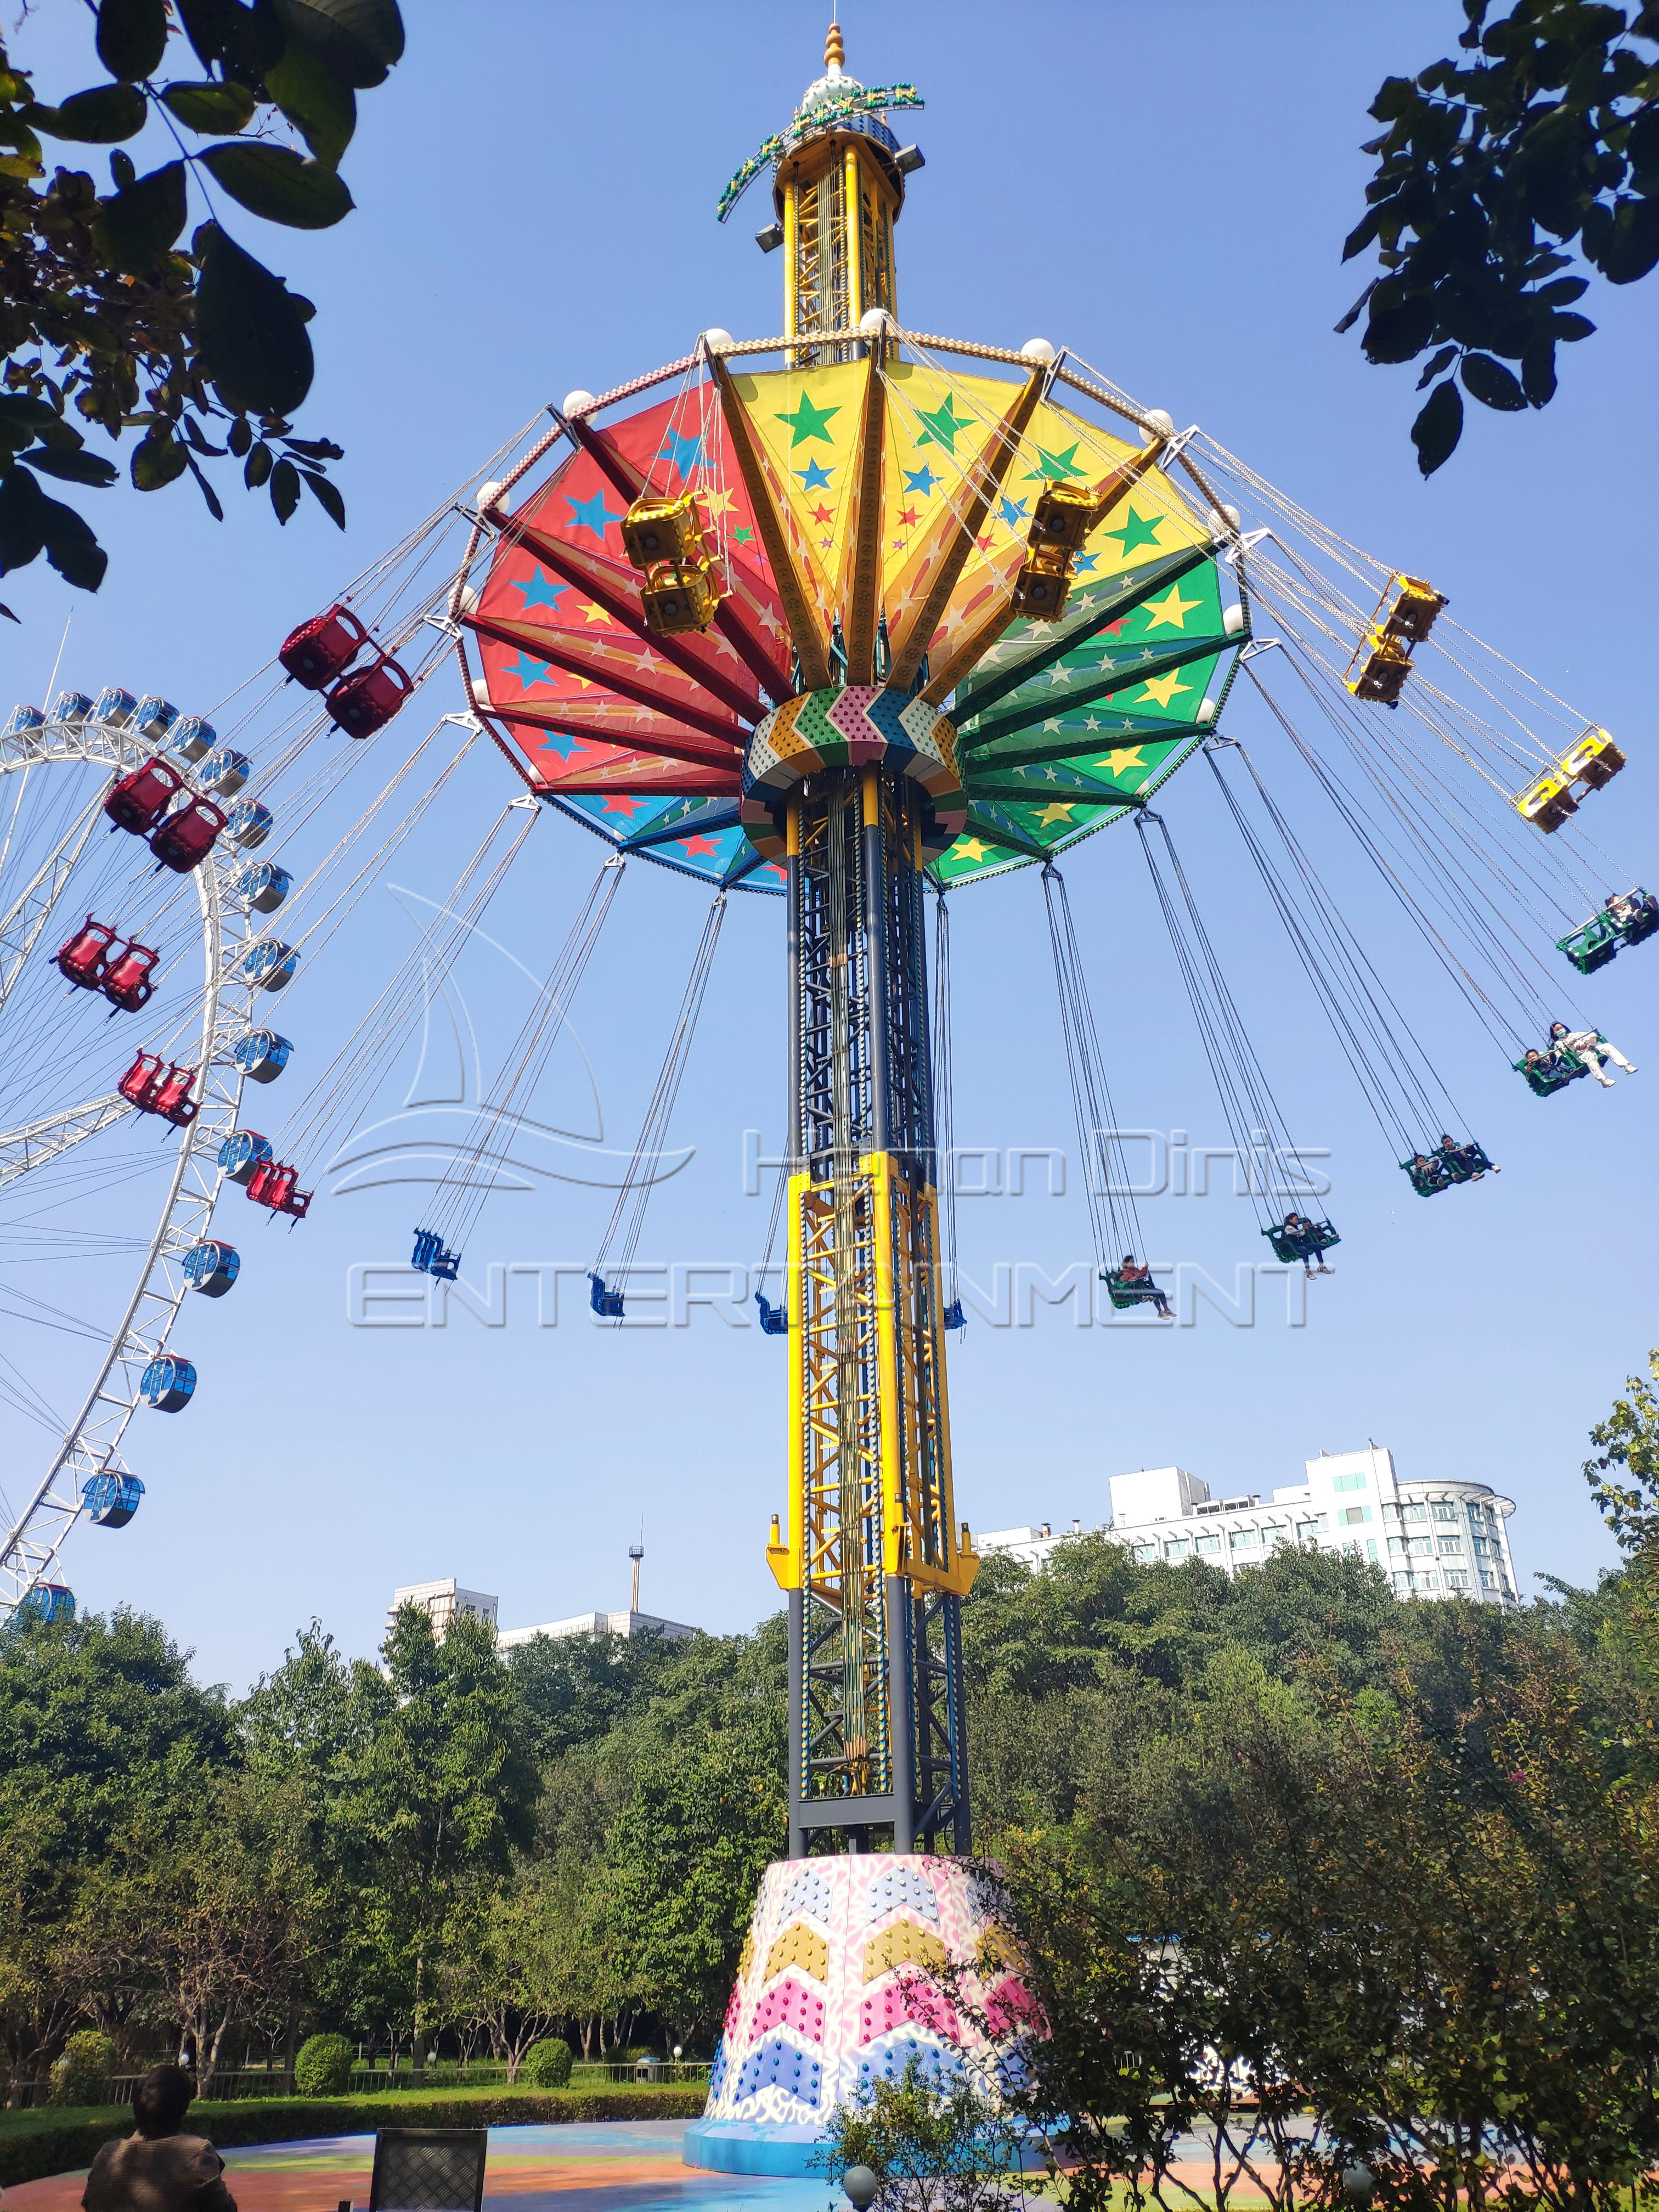 How to chose large amusement equipment manufacturer?